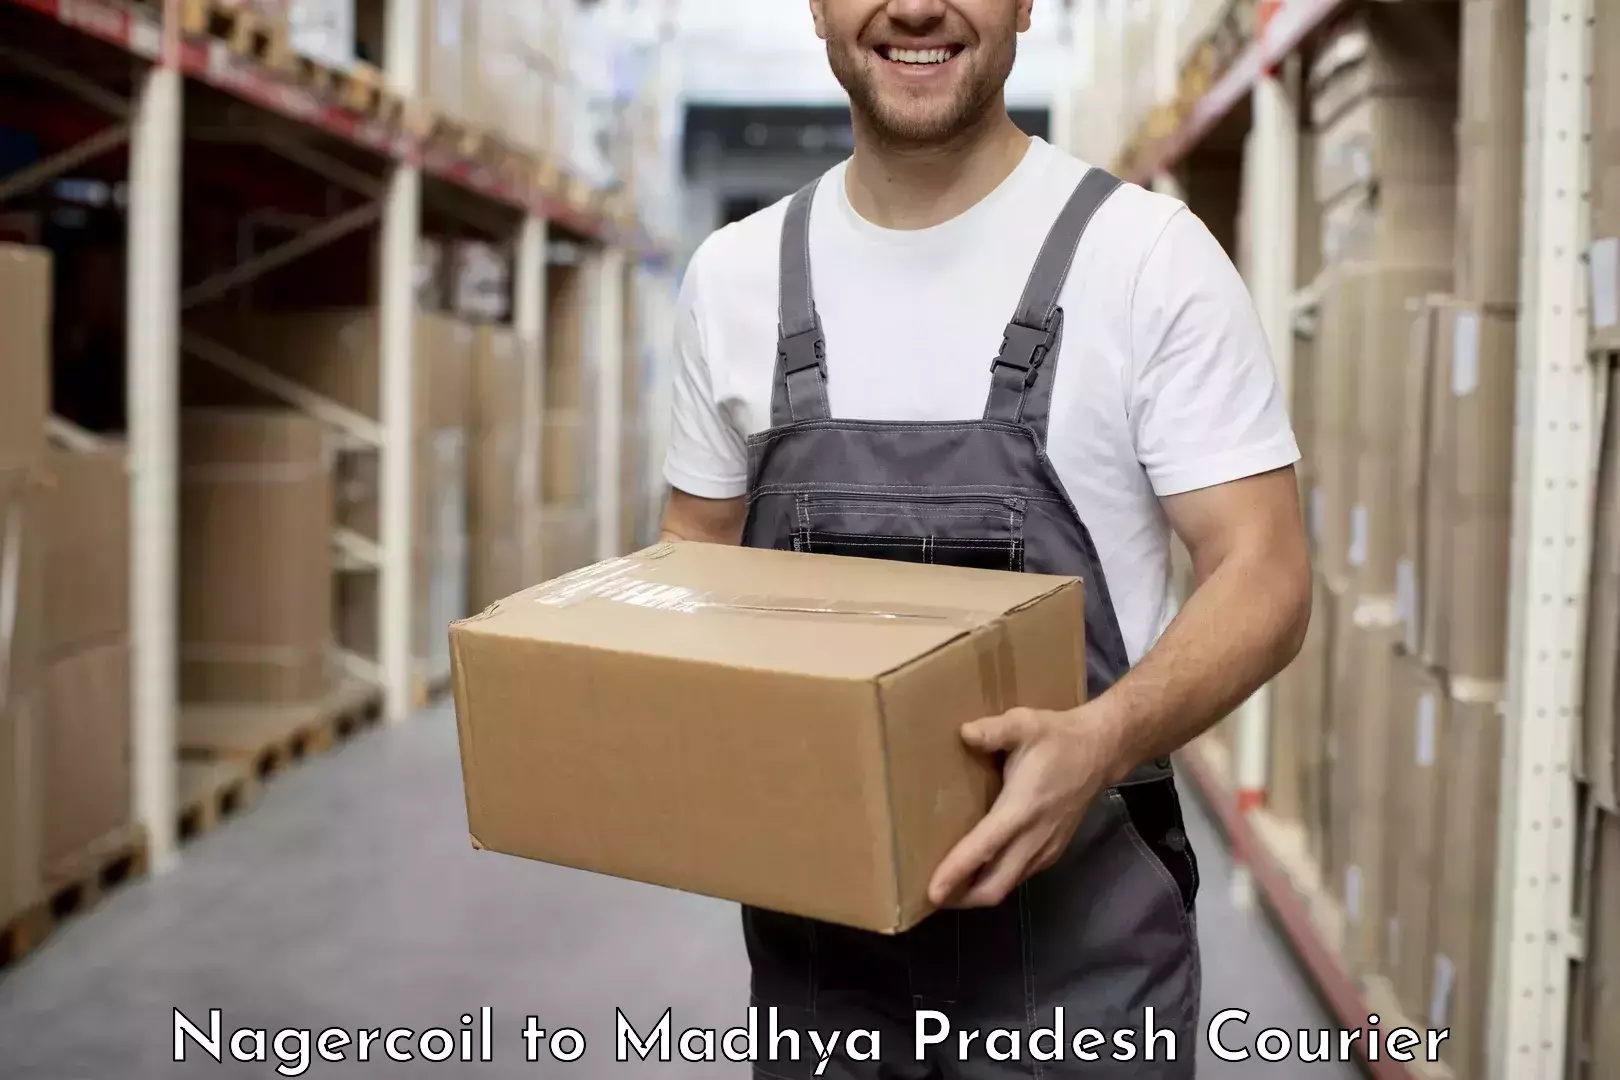 Courier dispatch services Nagercoil to Depalpur